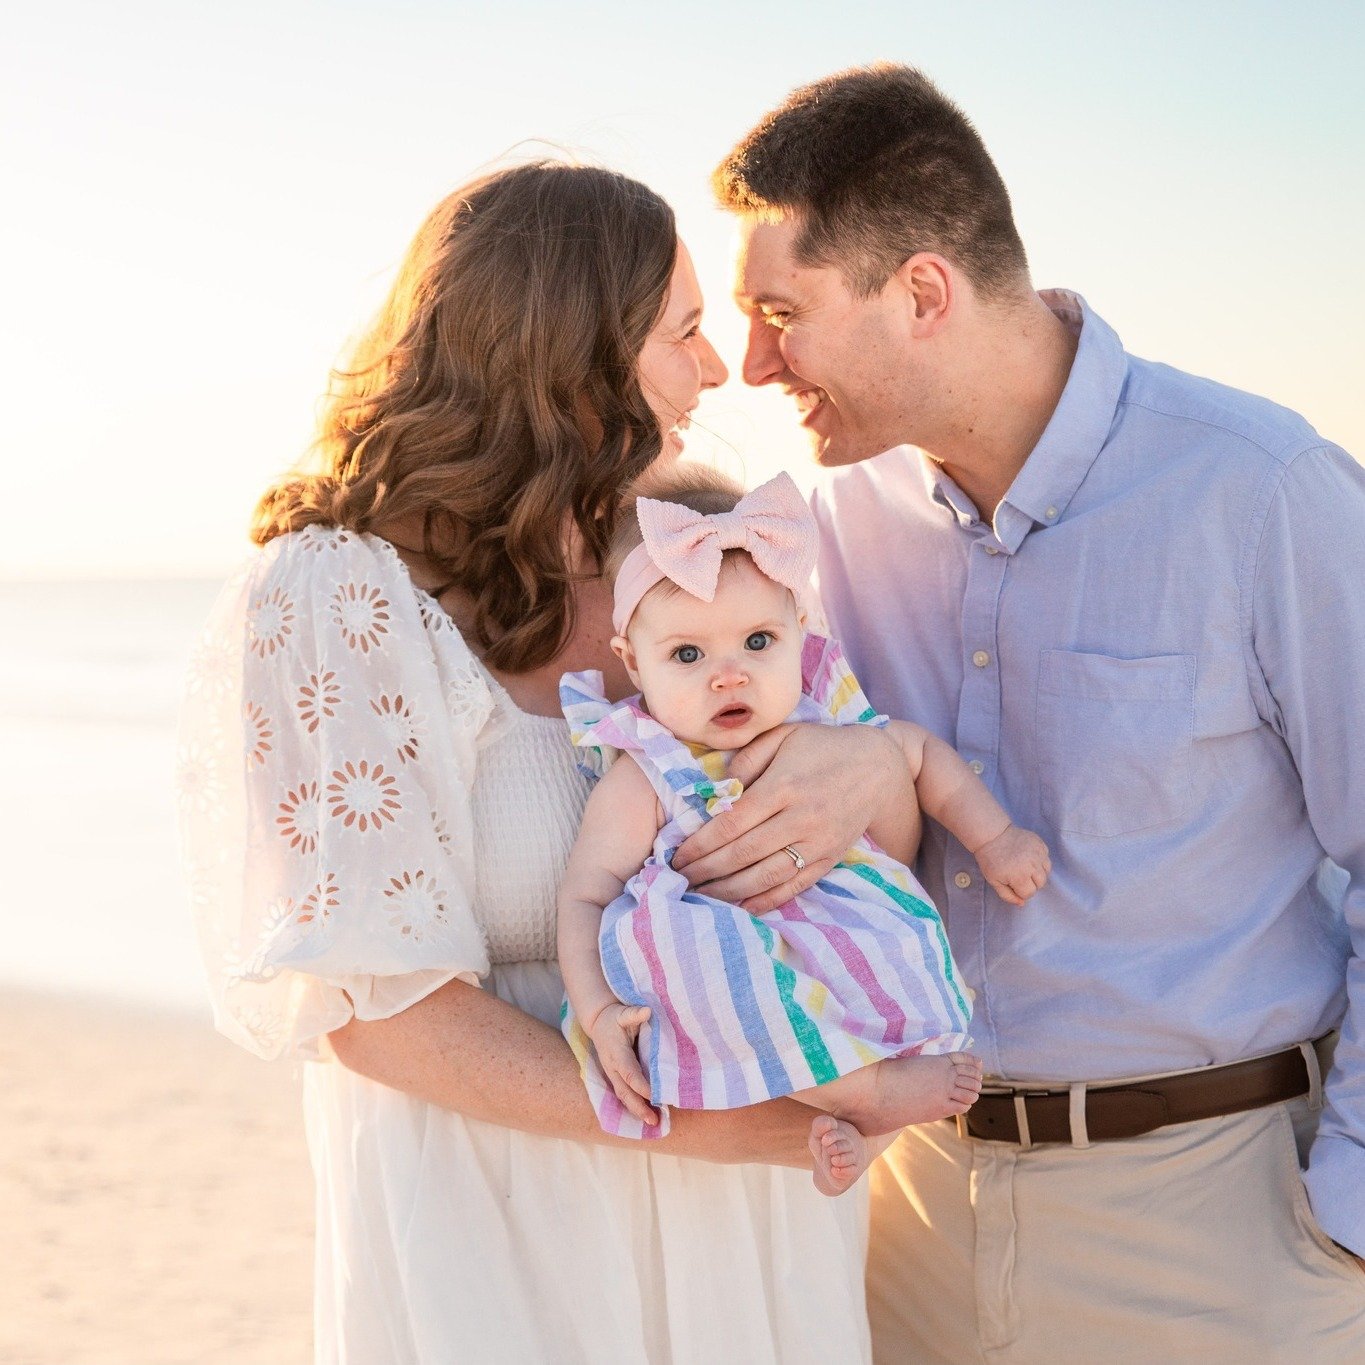 Just a few photos from my sunrise session this past Saturday with the Morris Family. Mornings and Evenings available this week! 

Booking link for mornings! https://www.jessicasalortphotos.com/sunrise-morning-mini-sessions

📞Contact Jessica Salort f